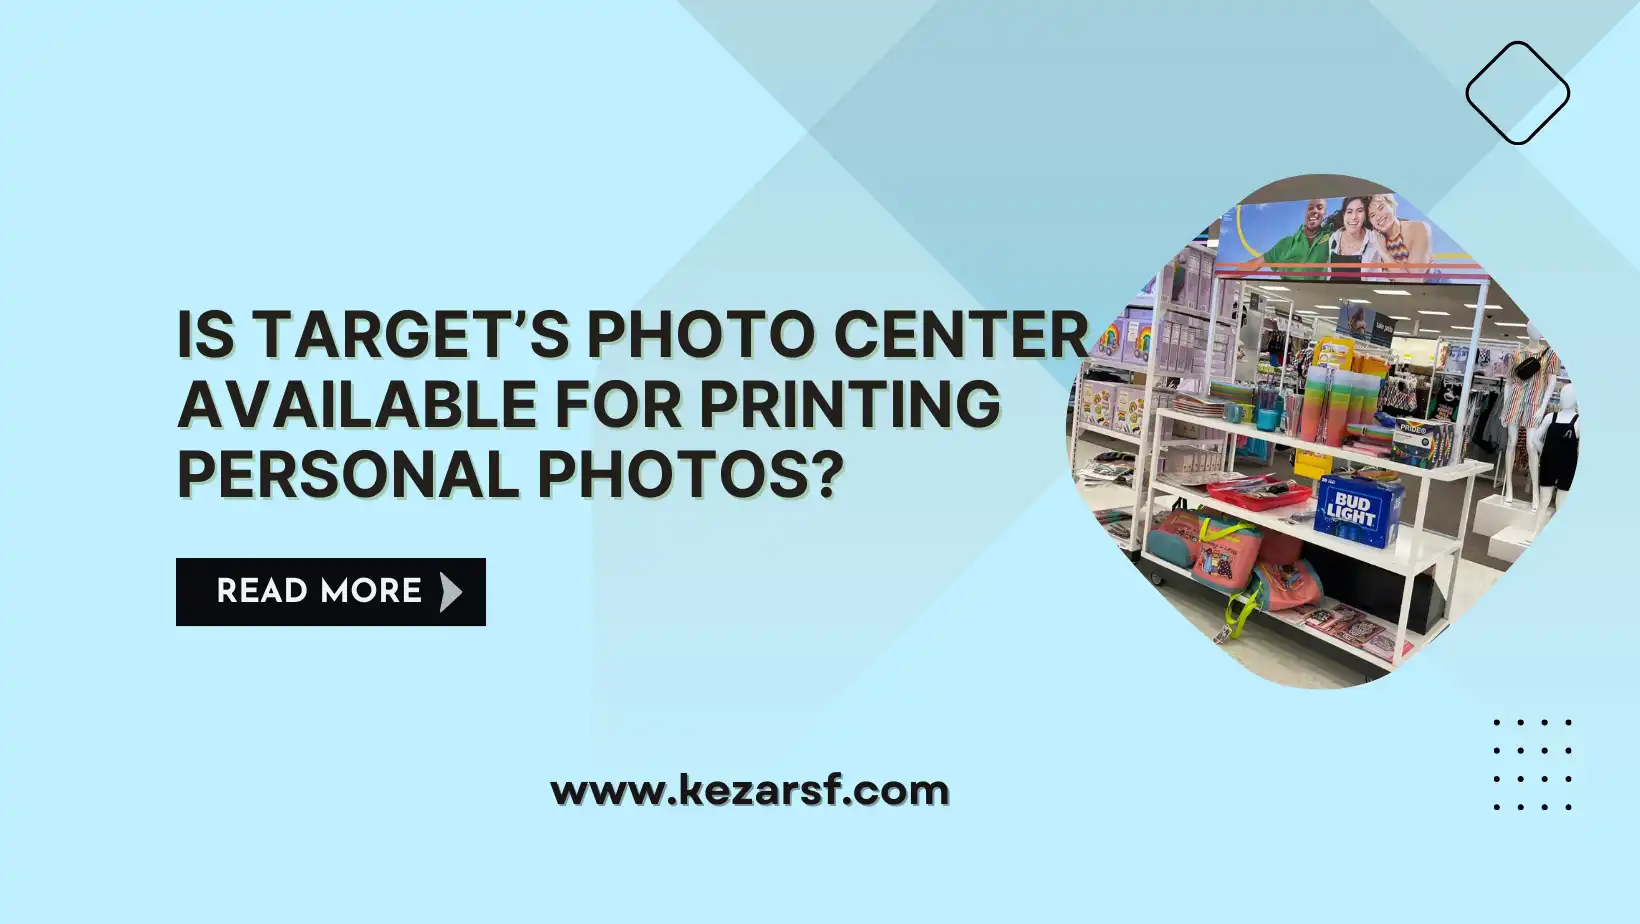 Is Target’s Photo Center Available for Printing Personal Photos?